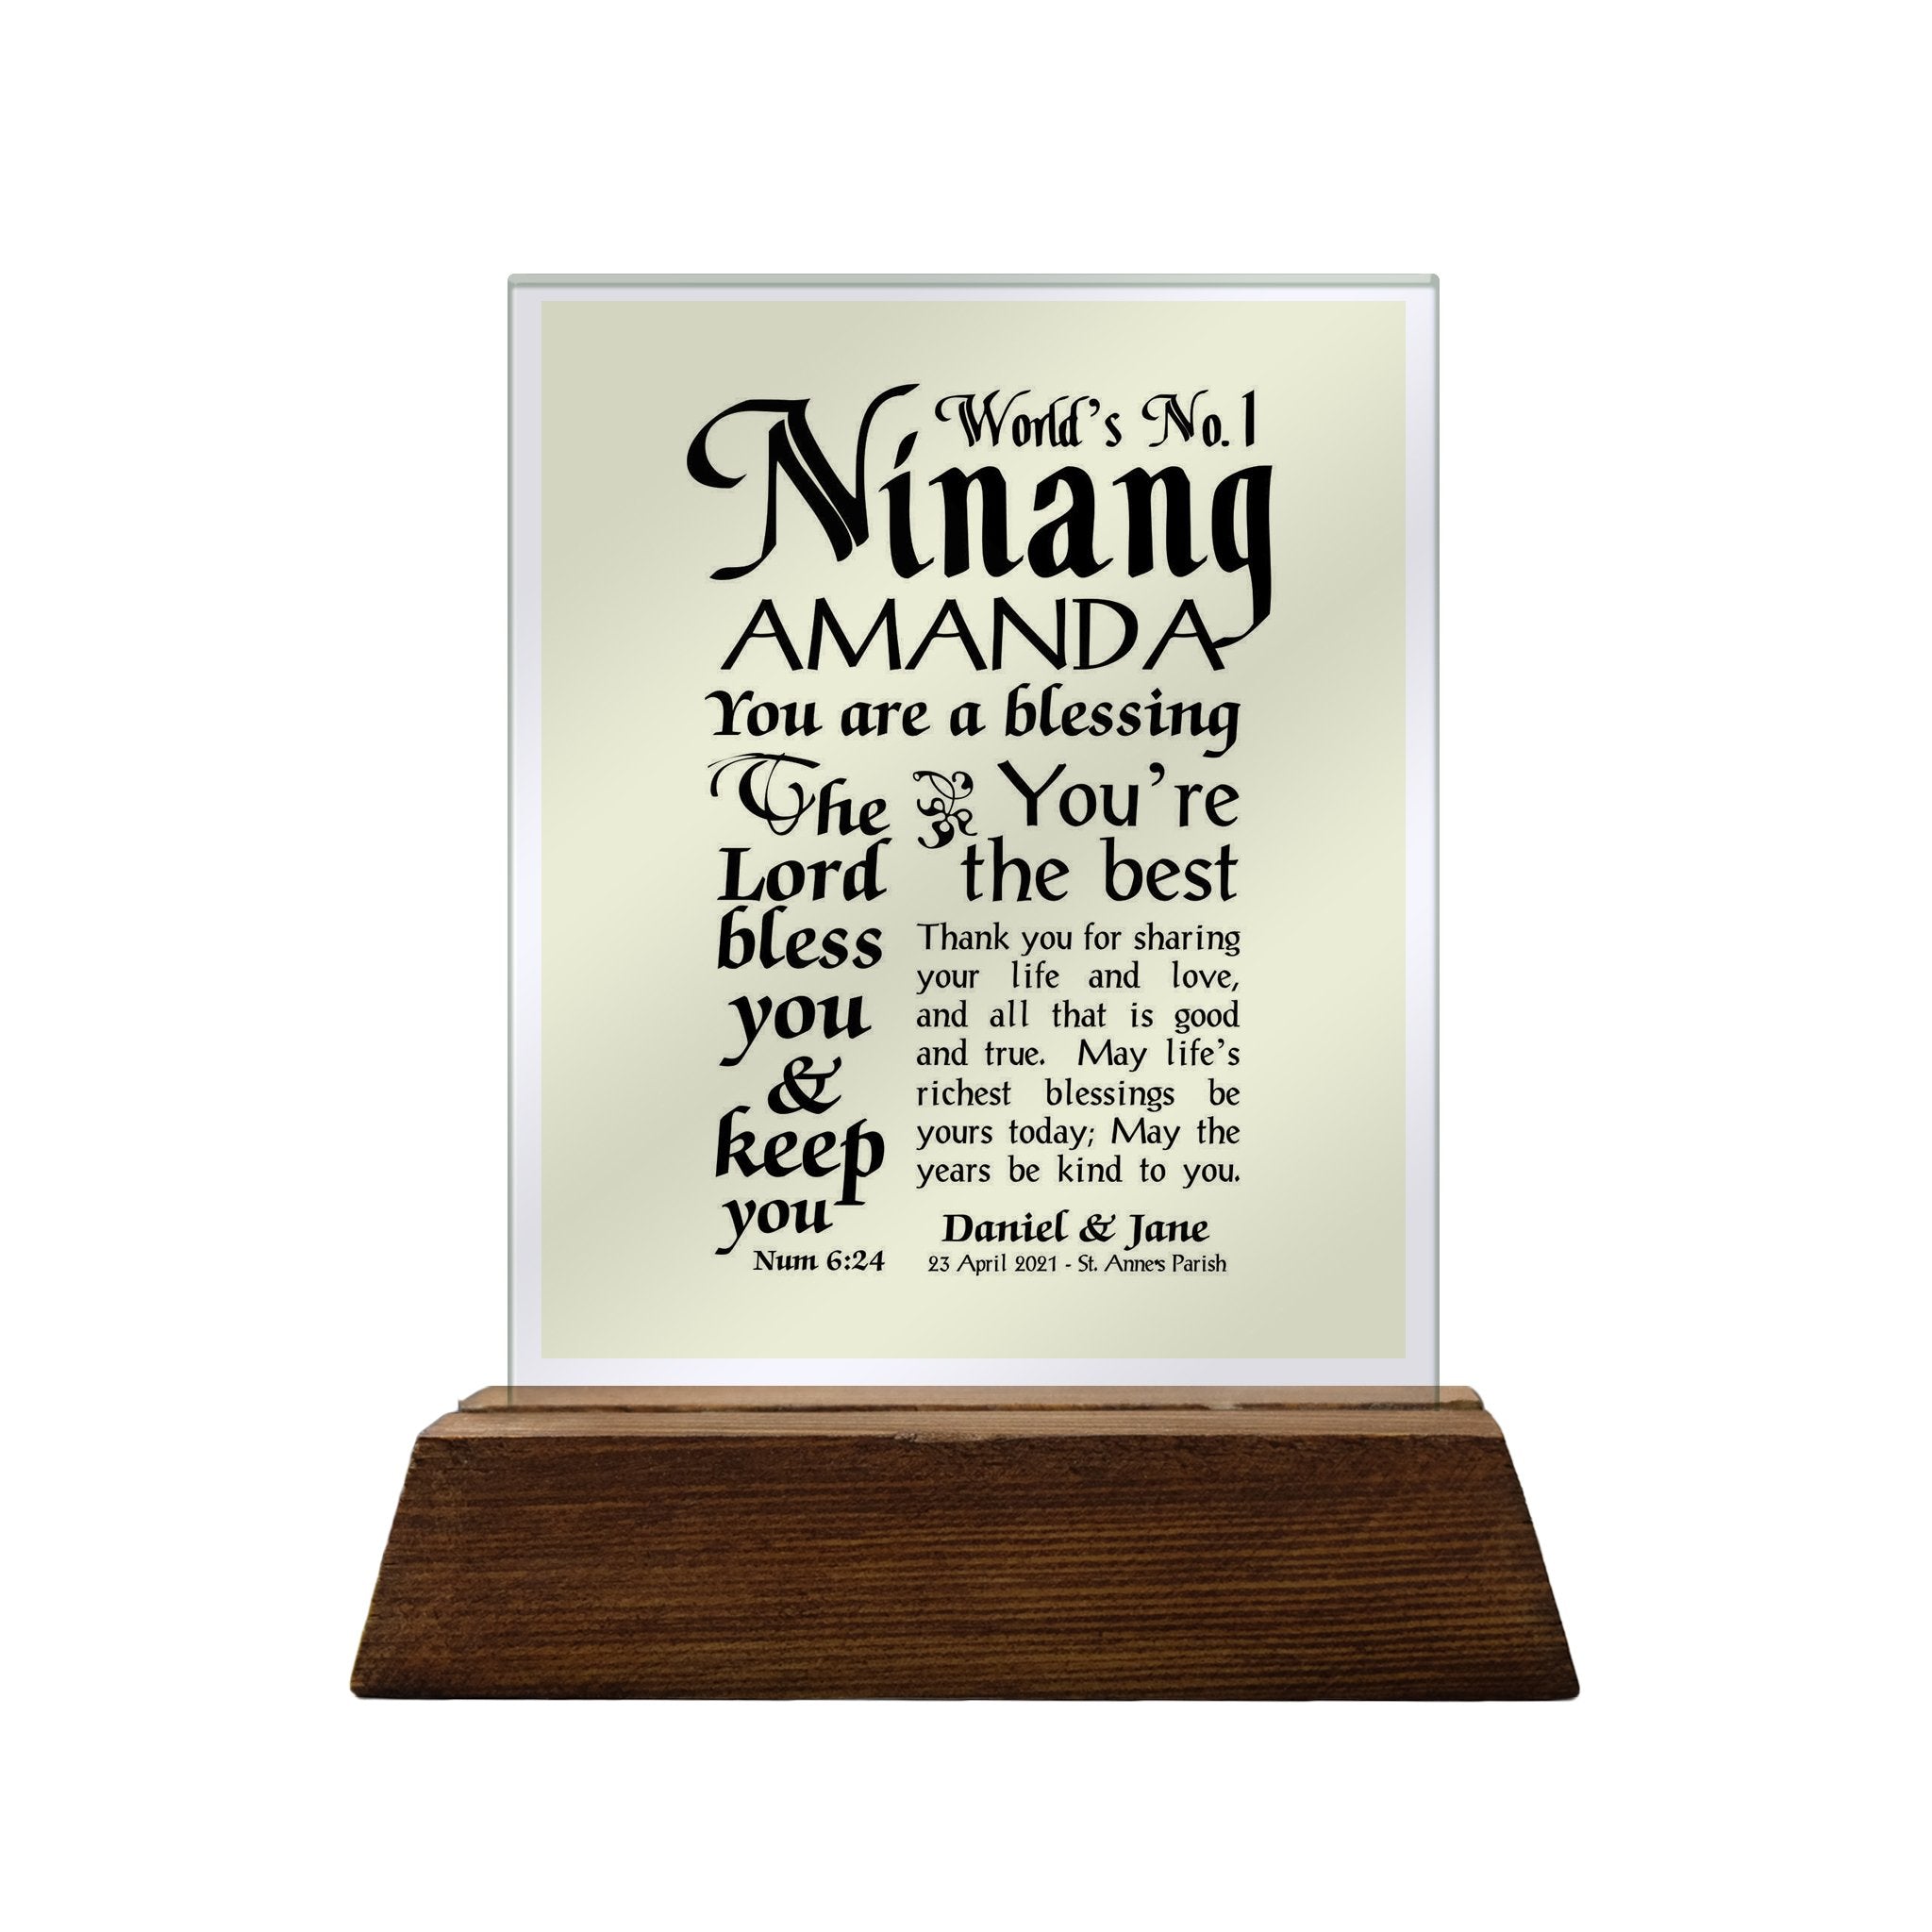 World's No. 1 Personalized Glass Plaque For Godparents